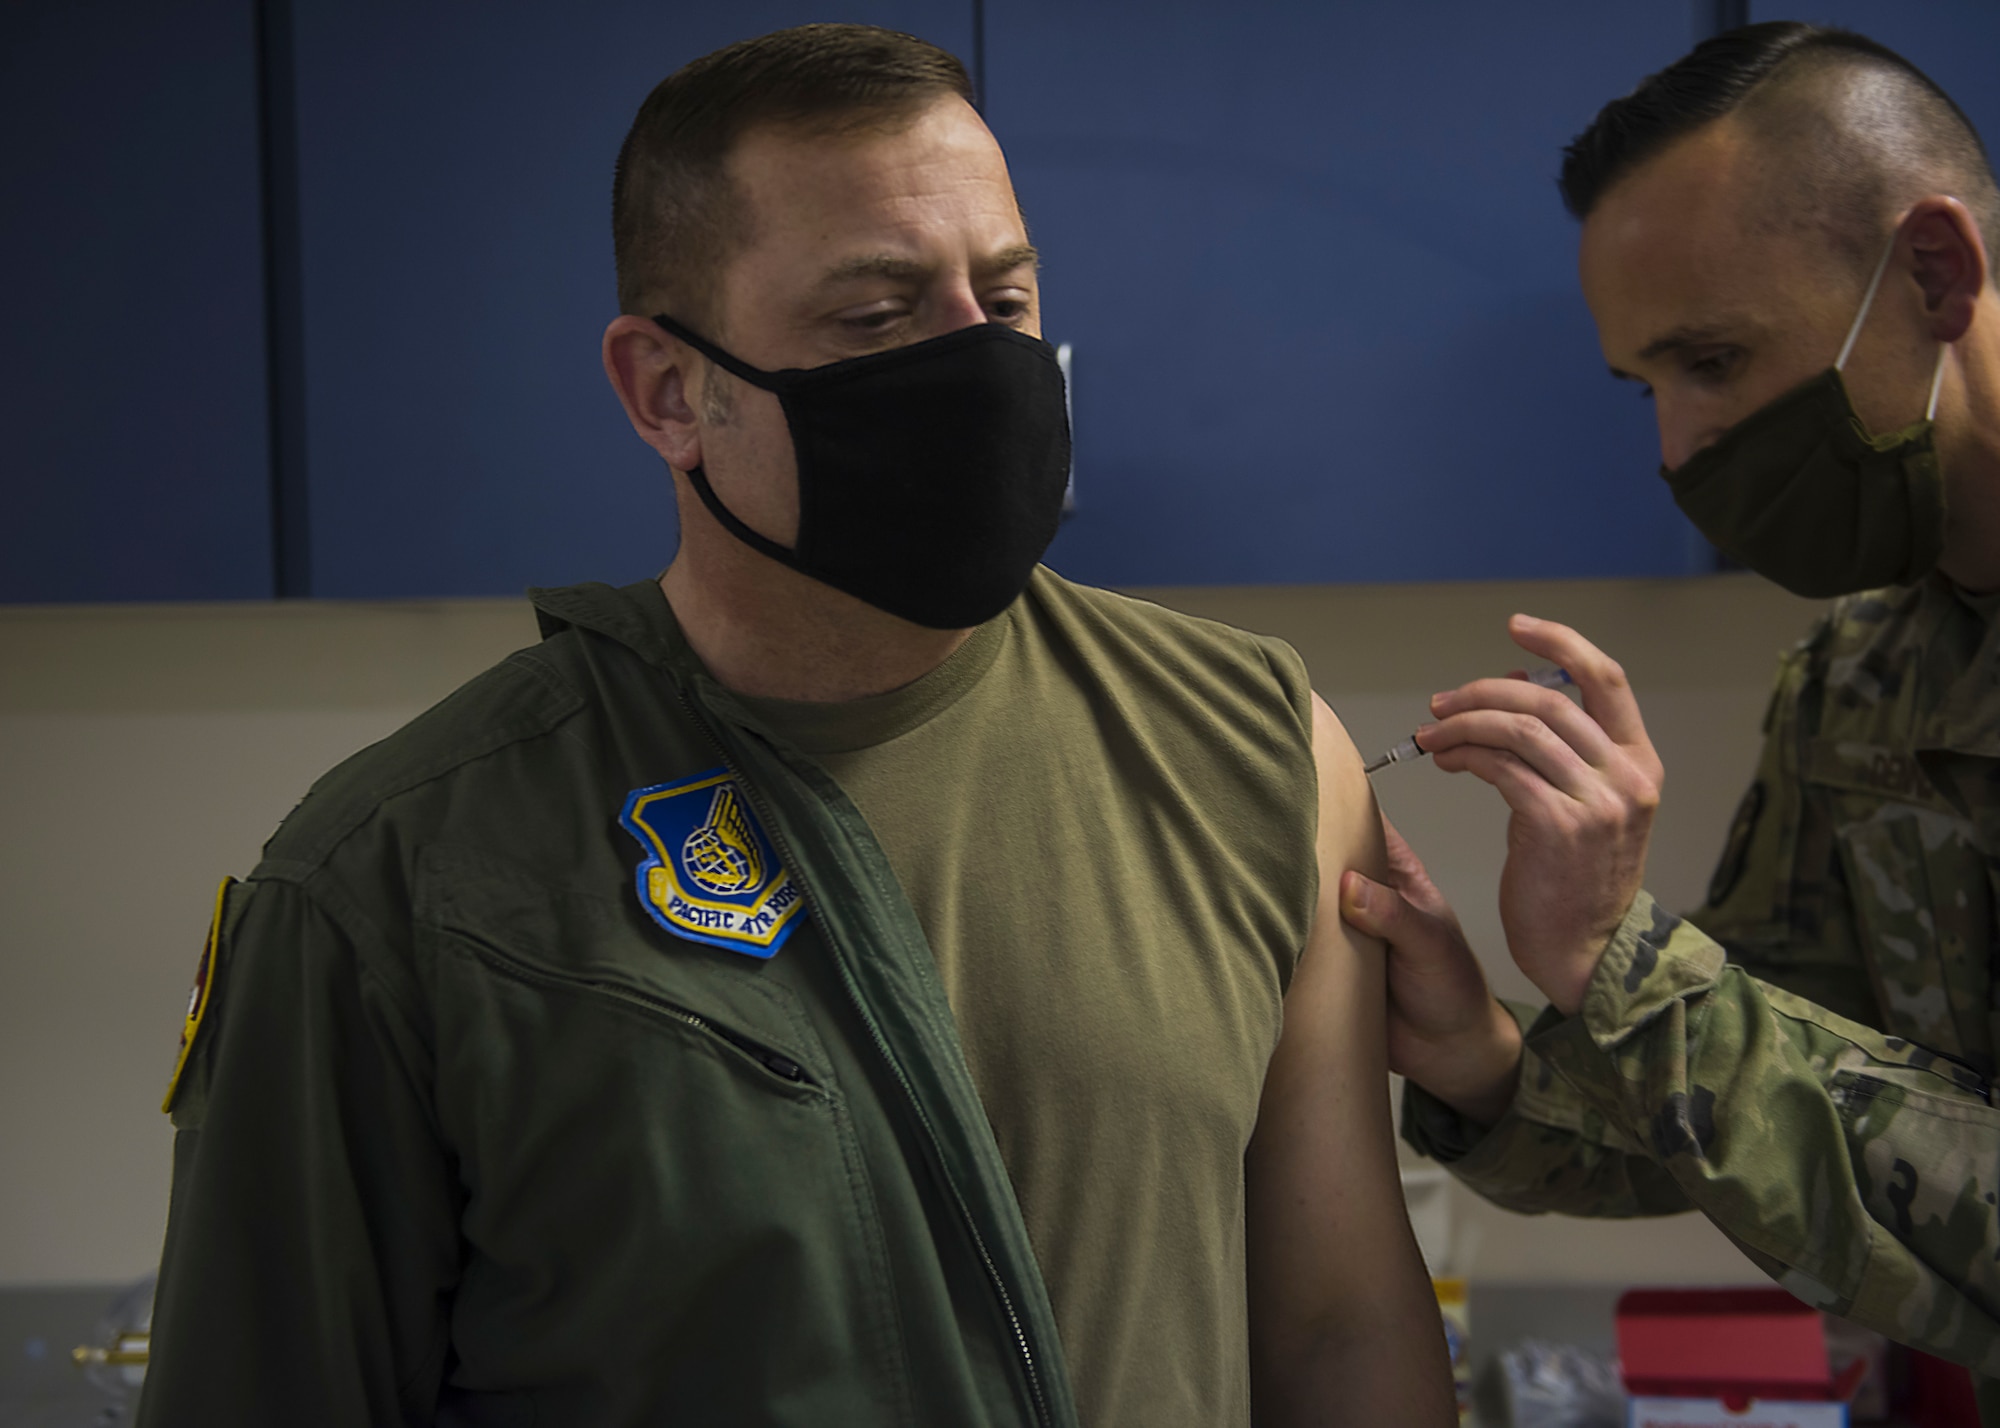 U.S. Air Force Staff Sgt. Gary Dennis, 35th Healthcare Operations Squadron NCO in charge of Allergy and Immunizations, gives Col. Jesse J. Friedel, 35th Fighter Wing commander, a dose of the COVID-19 vaccine at Misawa Air Base, Japan, Dec. 28, 2020. The Department of Defense began limited delivery of the COVID-19 vaccine to medical treatment facilities and other health care facilities for voluntary vaccination to mission essential personnel. (U.S. Air Force photo by Airman 1st Class Leon Redfern)